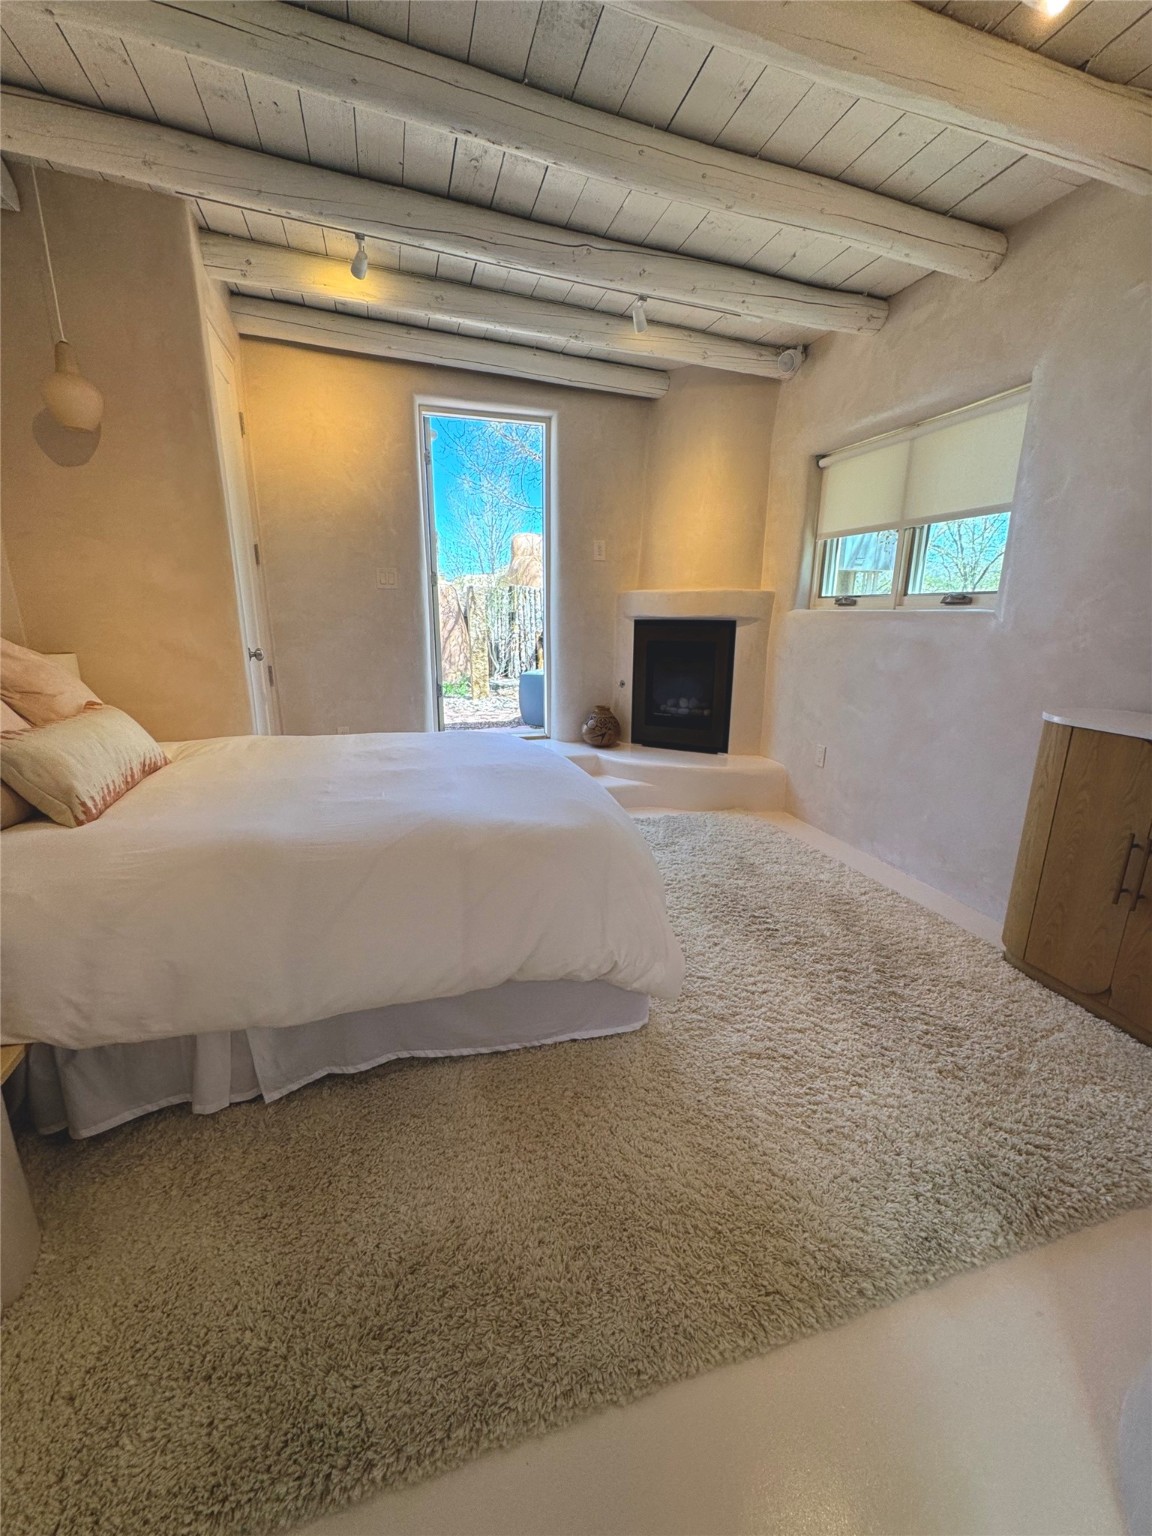 second bedroom, fireplace, view